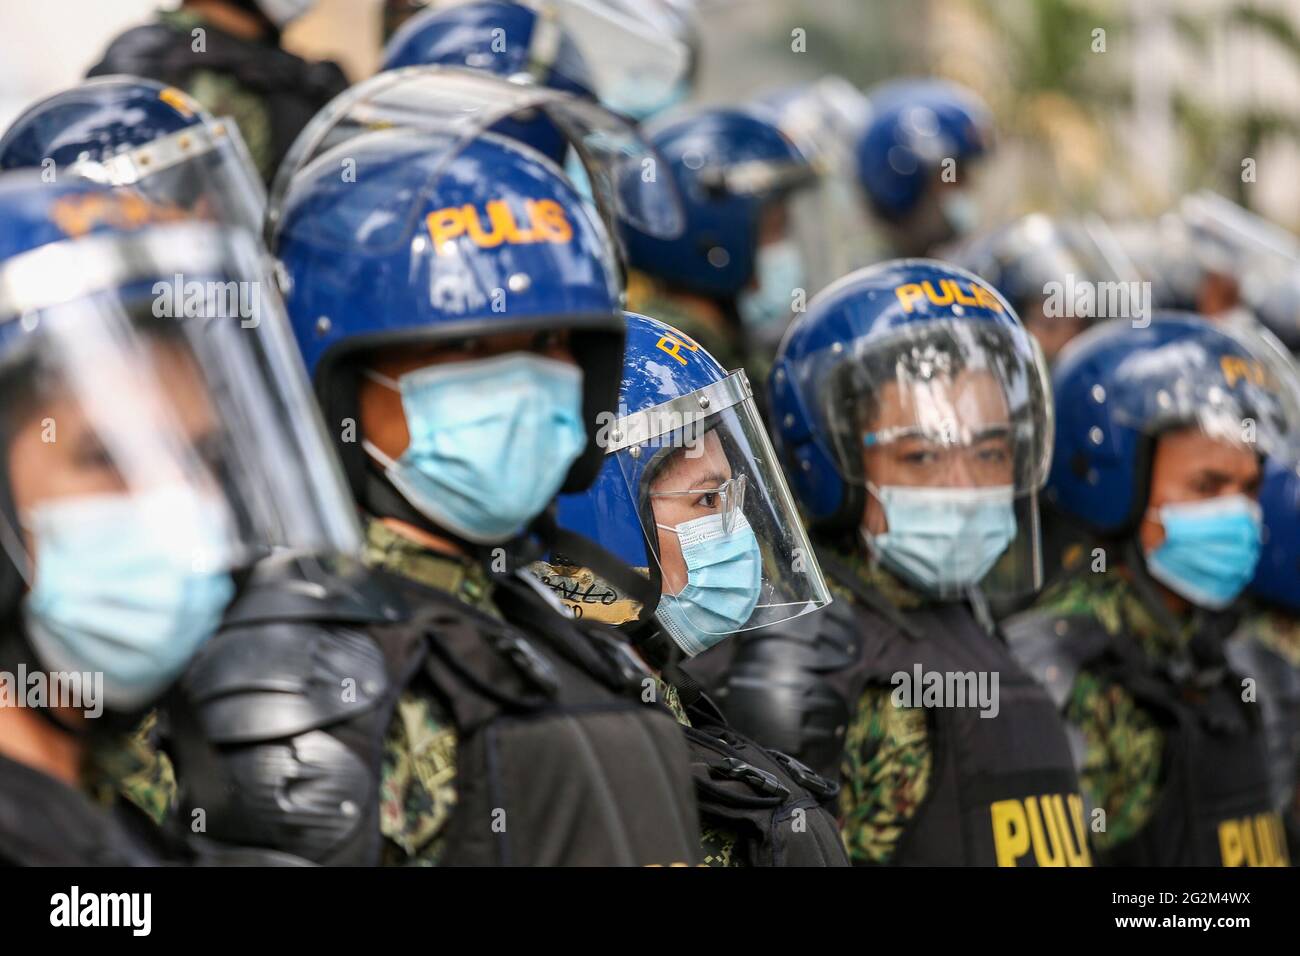 Metro Manila, Philippines. 12th June 2021. Anti-riot policemen take their positions as activists hold a protest to mark Independence Day outside the Chinese Consulate in the financial district of Makati. Various groups called on China to stop its maritime activities in the disputed South China Sea, which endangers peace and stability in the region. Credit: Majority World CIC/Alamy Live News Stock Photo